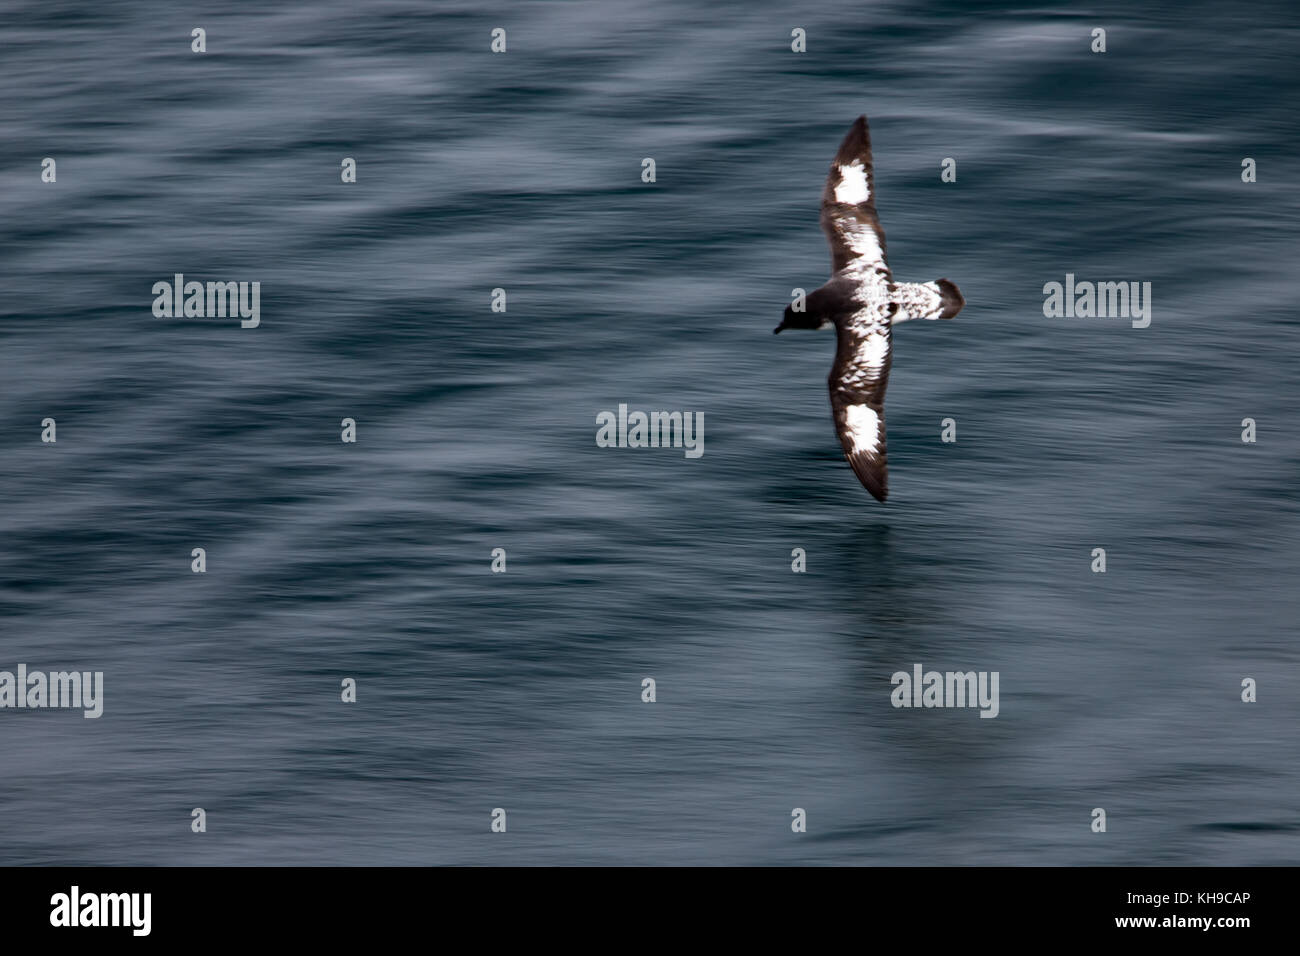 Motion blur image of a cape petrel also known as pintado petrel gliding above the surface of the Atlantic Ocean Stock Photo